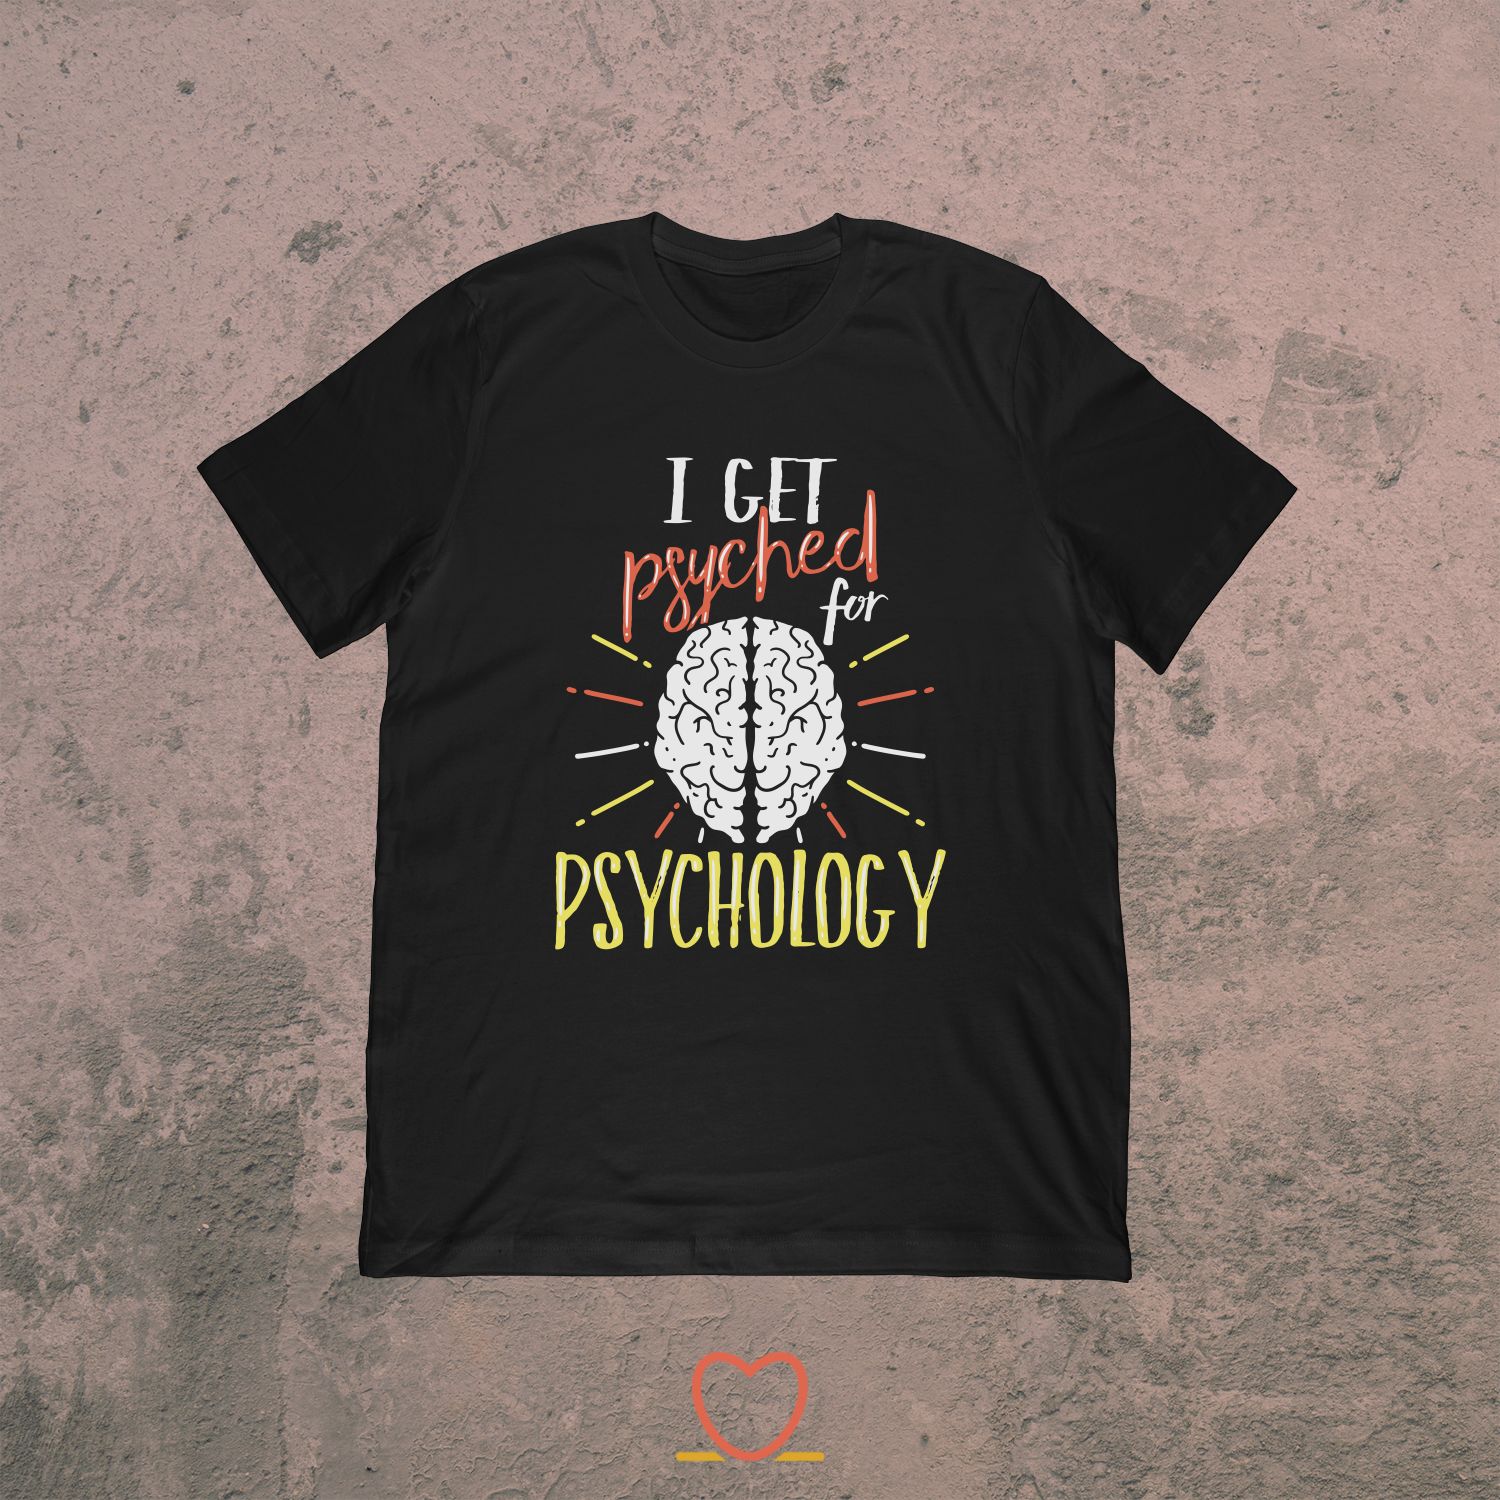 I Get Psyched For Psychology – Funny Psychologist Tee